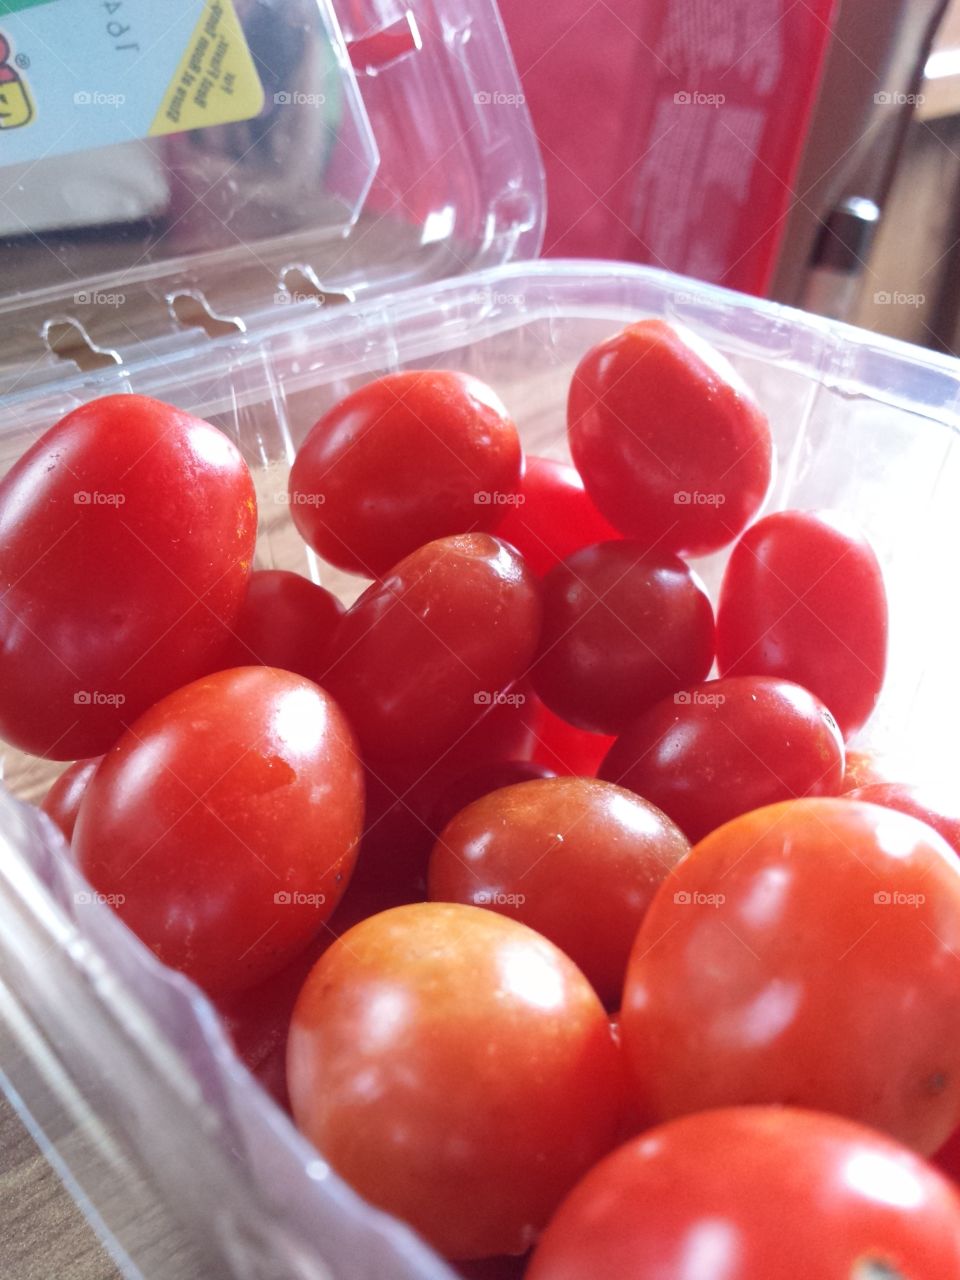 Cherry tomatoes up close.